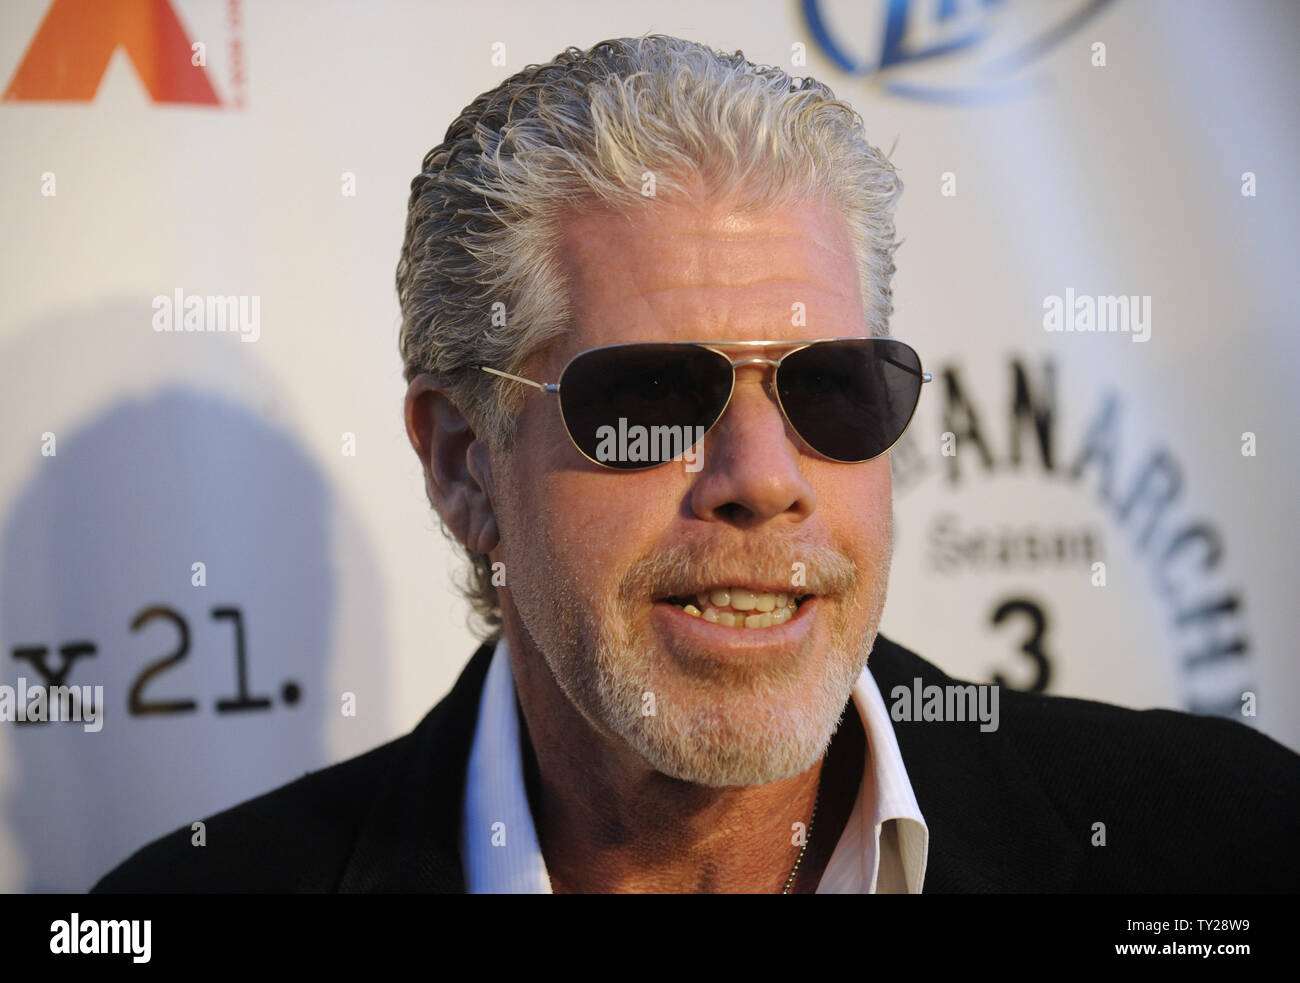 Cast member Ron Perlman attends the Sons of Anarchy, Season 4 premiere screening at the Arclight Theatre in the Hollywood section of Los Angeles on August 30, 2011.      UPI/Phil McCarten Stock Photo